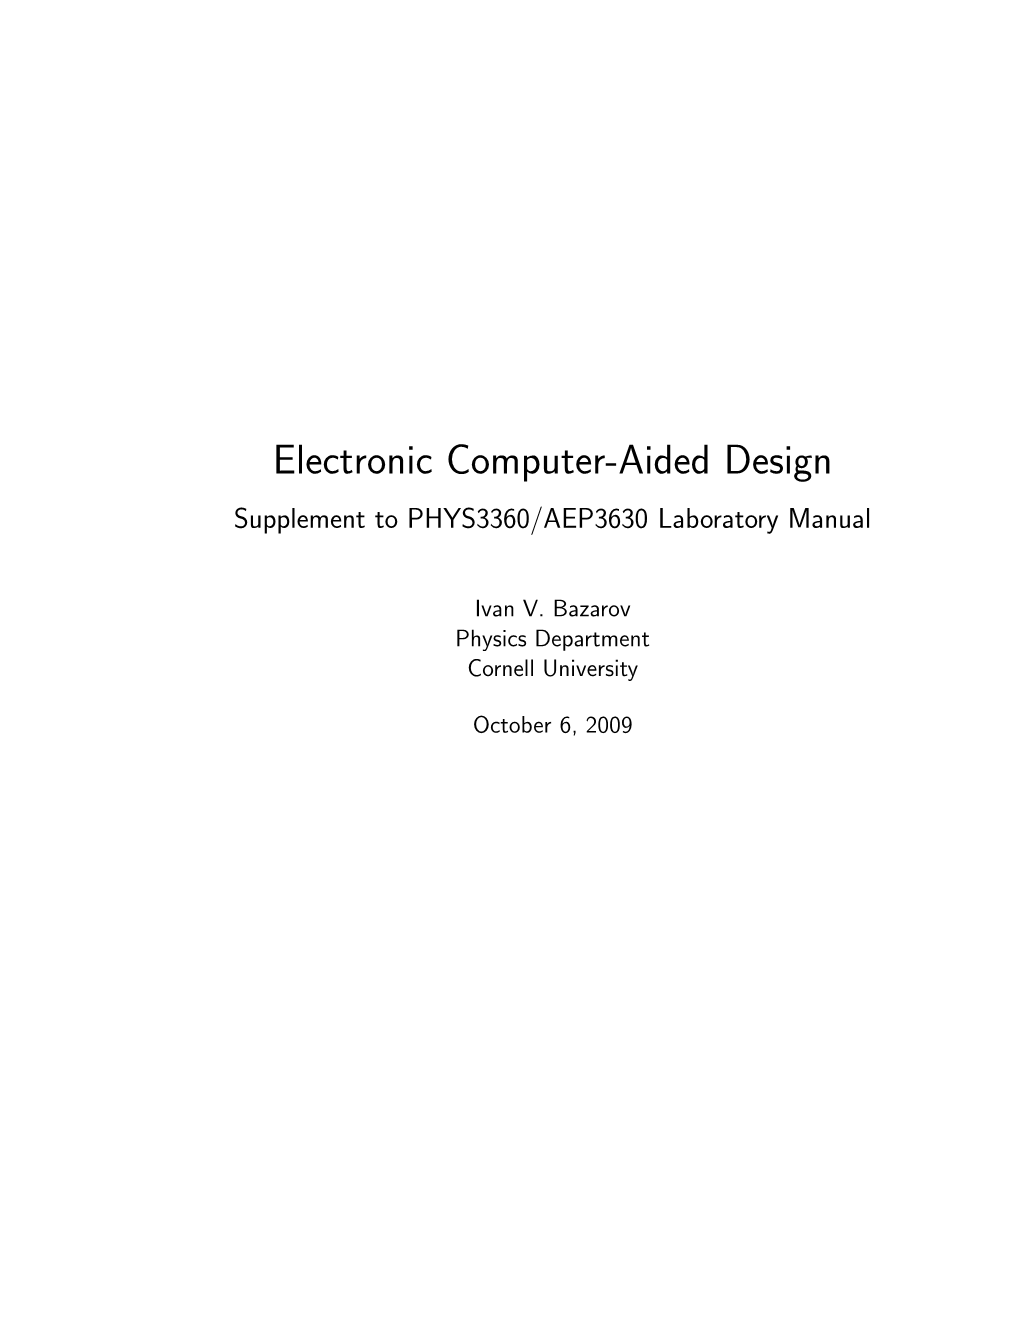 Electronic Computer-Aided Design Supplement to PHYS3360/AEP3630 Laboratory Manual